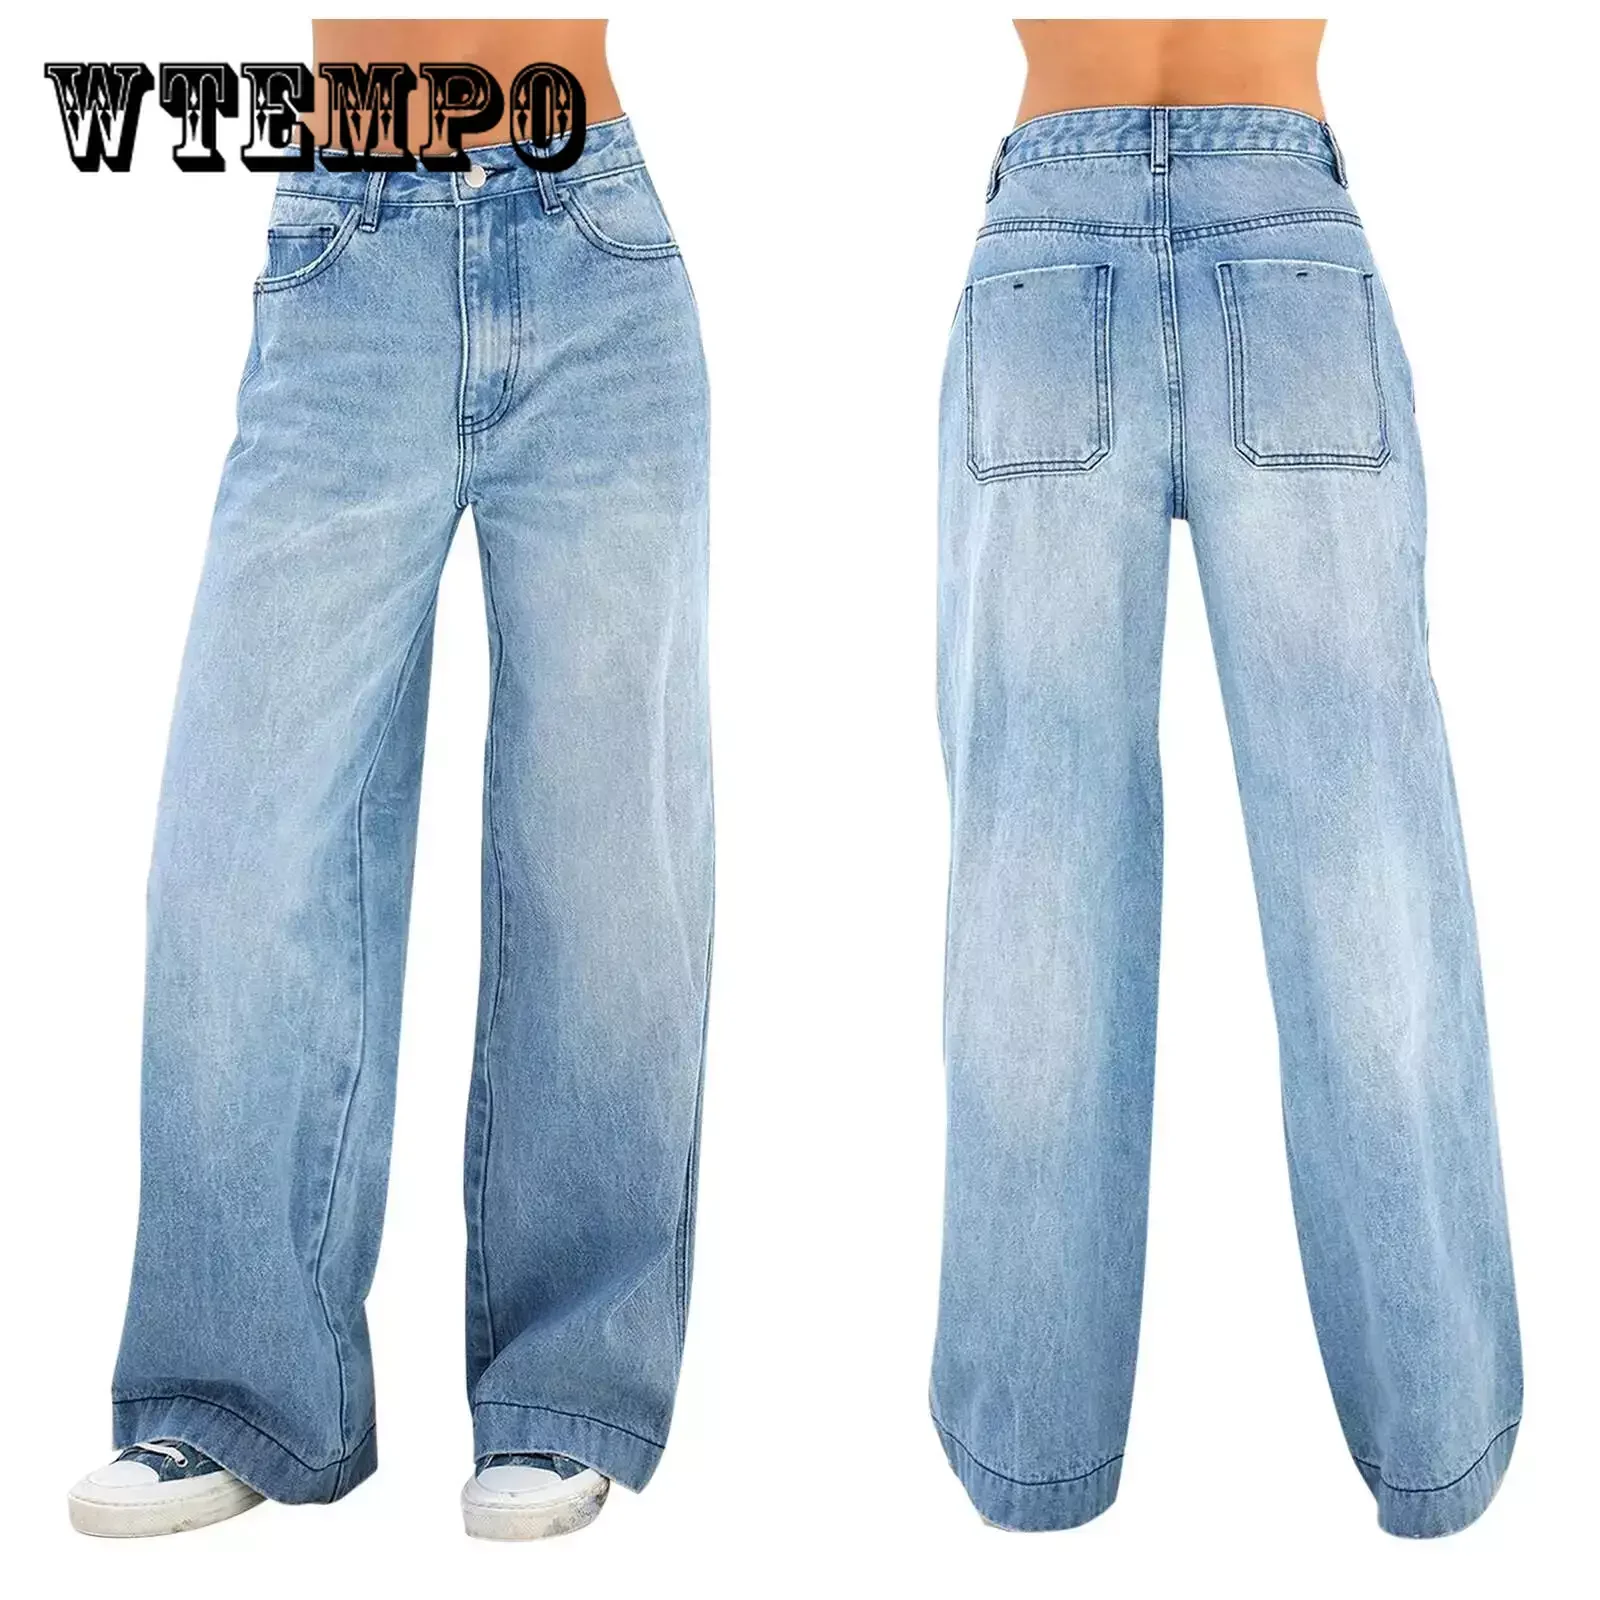 WTEMPO Women's High Waist Wide Leg Jeans Ladies Washed Denim Pants Loose Zip Fly Front Breathable Solid Color Jeans Trousers 2022 fashion lace up solid color street style denim trousers ladies jeans women s clothing